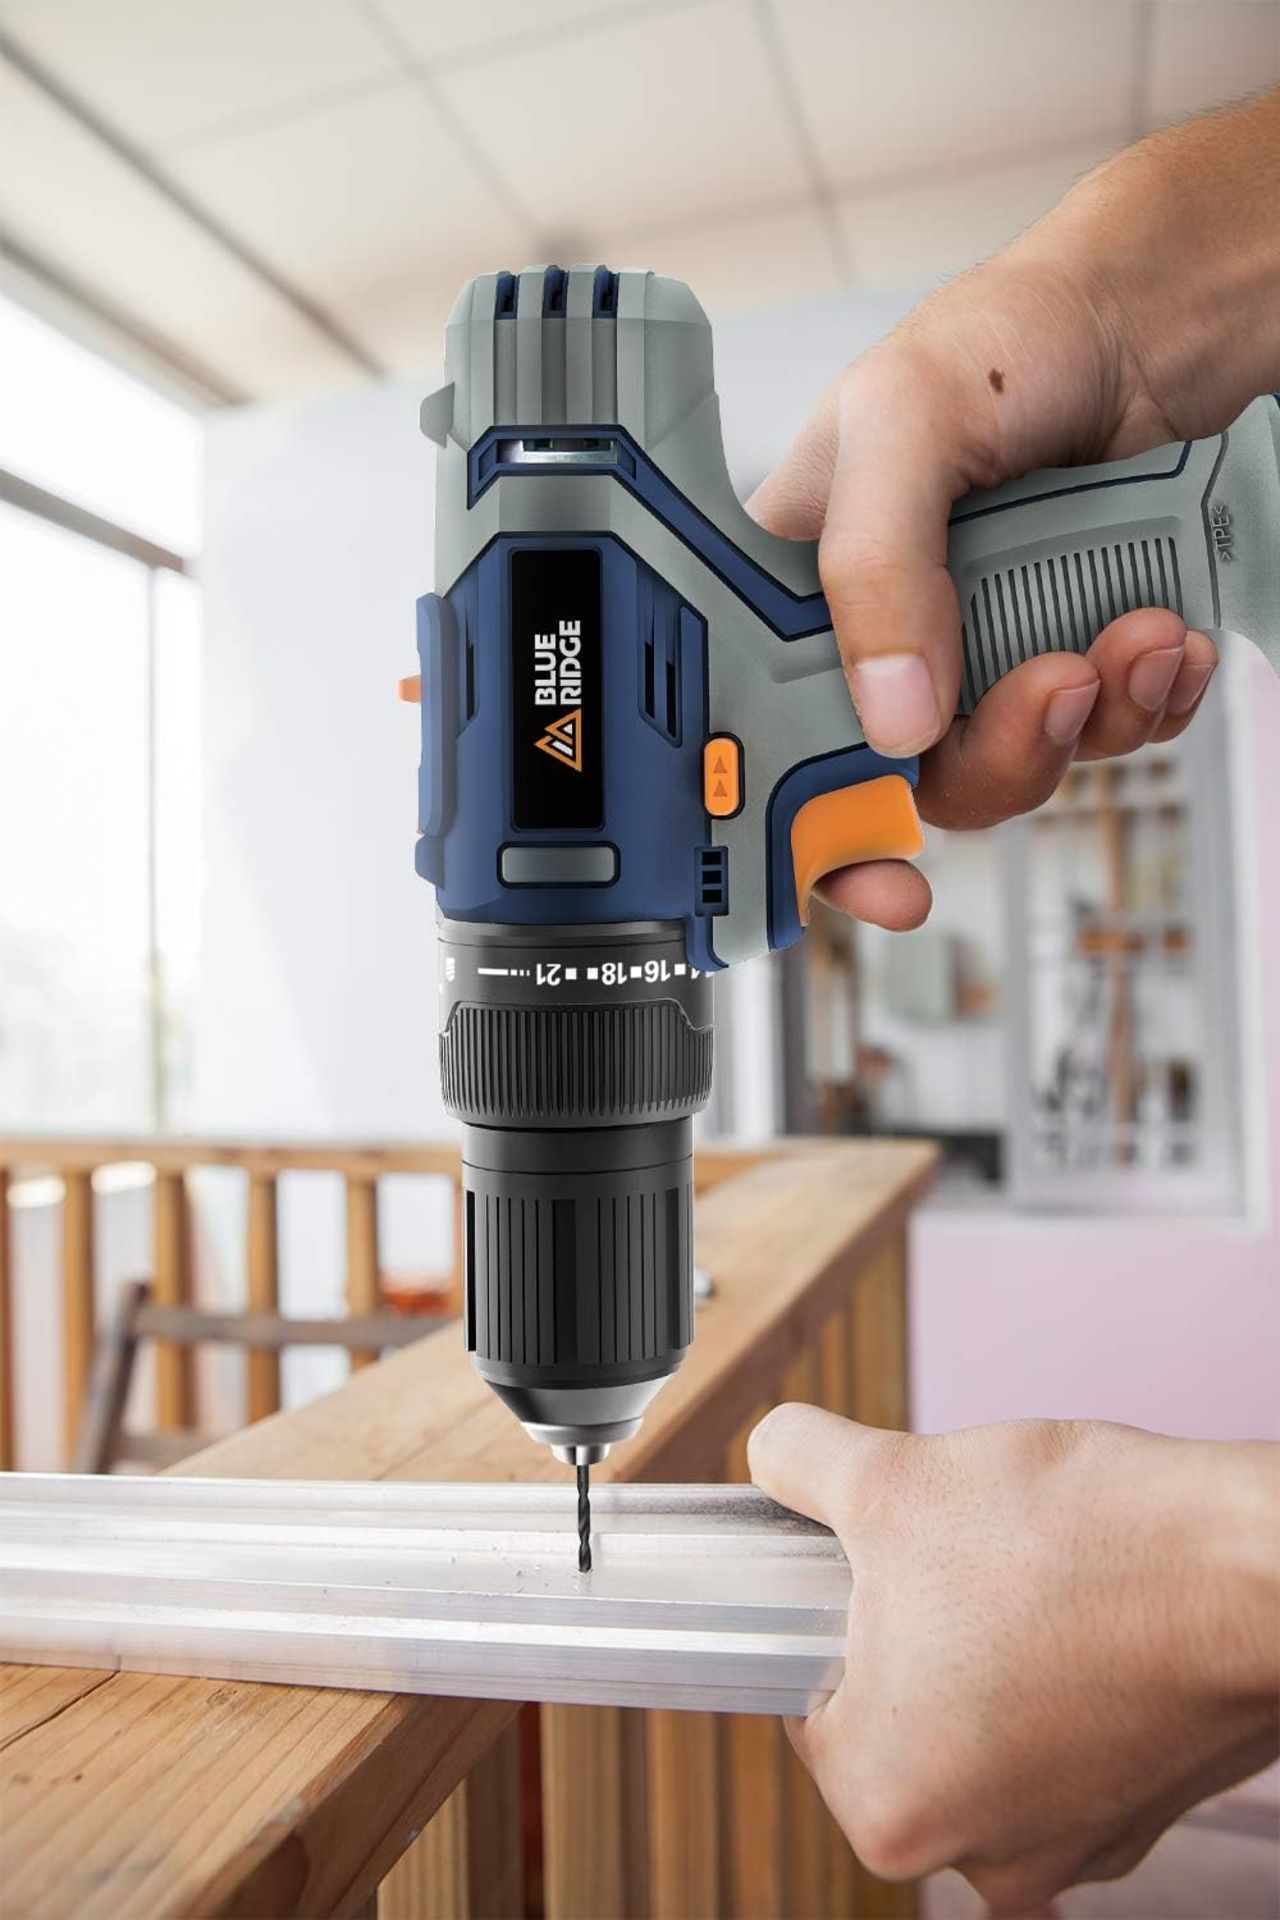 NEW & BOXED BLUE RIDGE 18V Cordless Hammer Drill with 2 x 1.5 Ah Li-ion Batteries & 43 Piece - Image 6 of 6